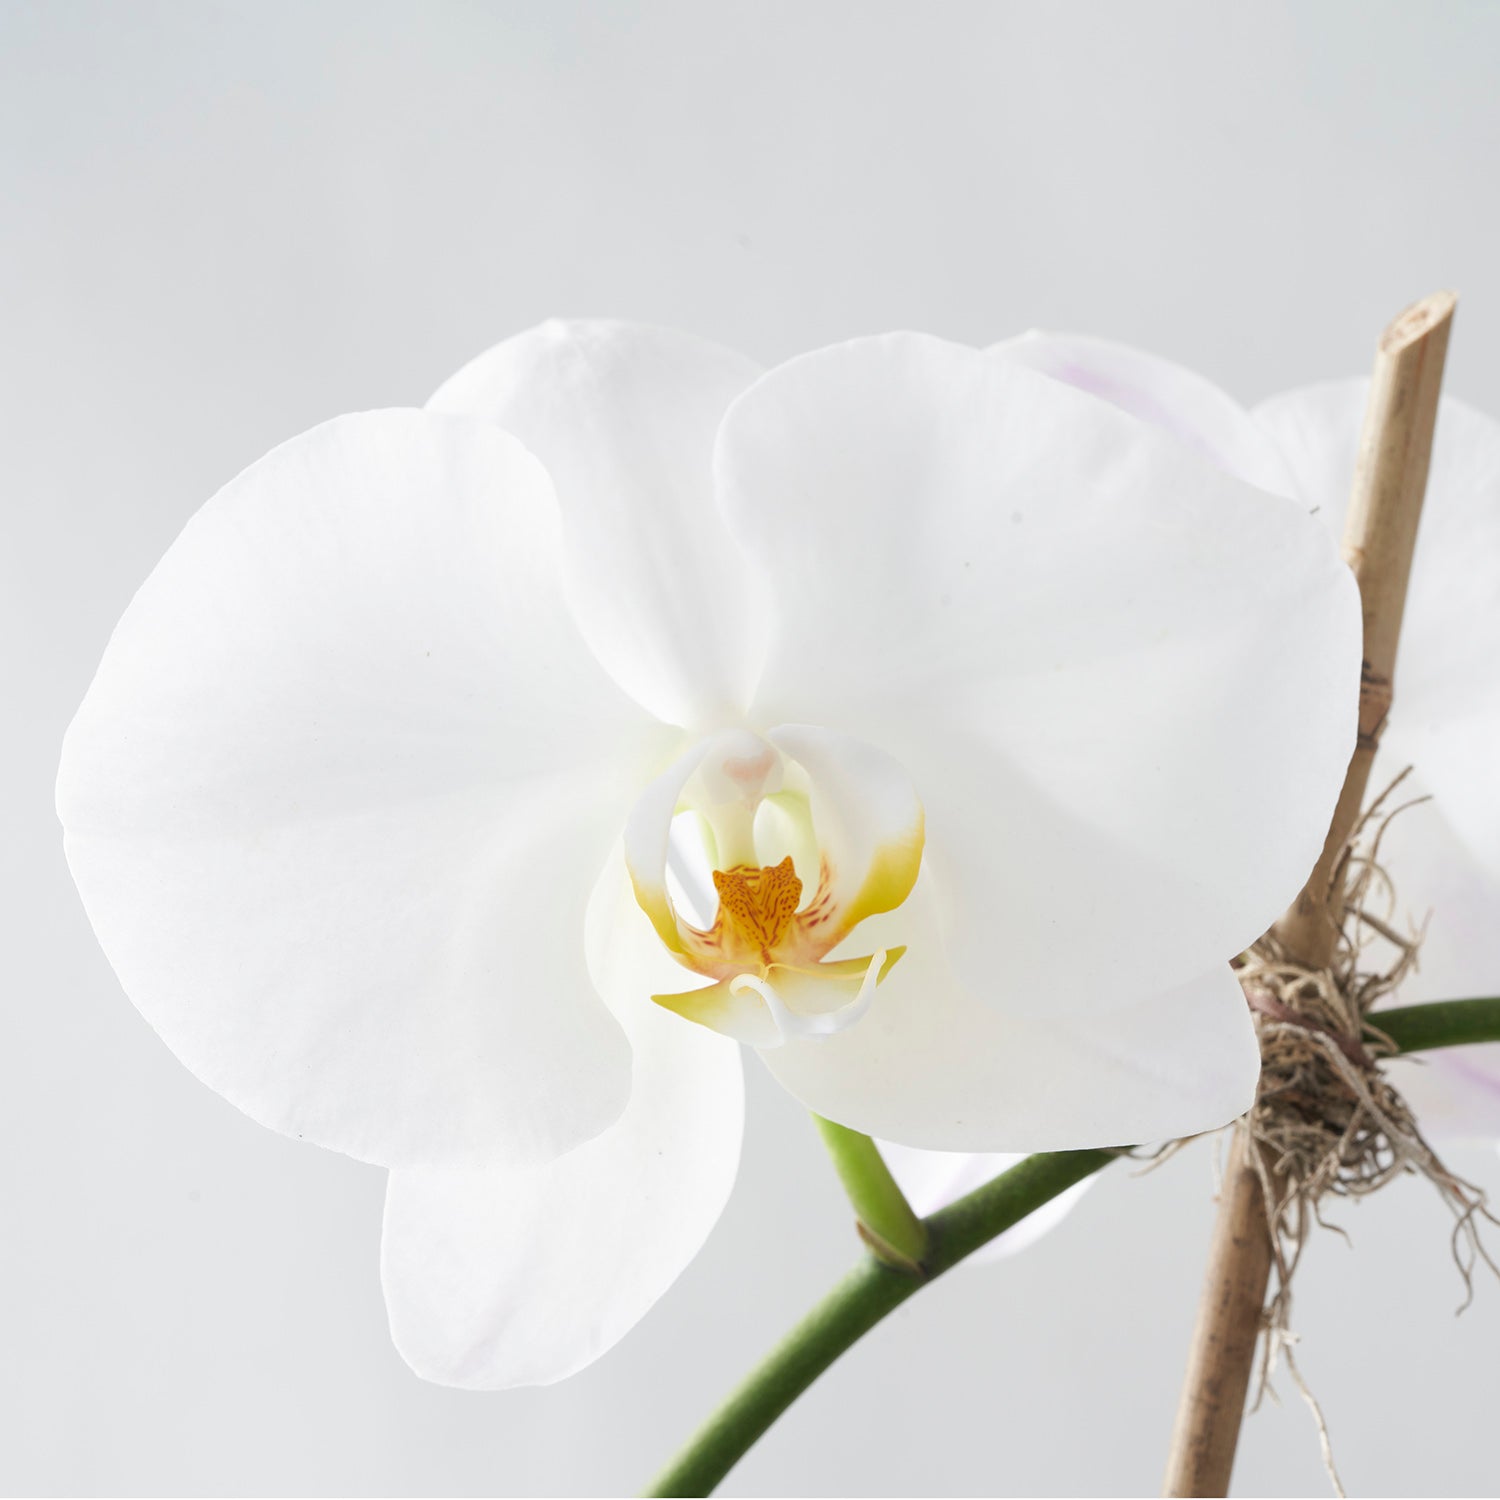 Closeup of white phalaenopsis orchid, with yellow center, on white background.